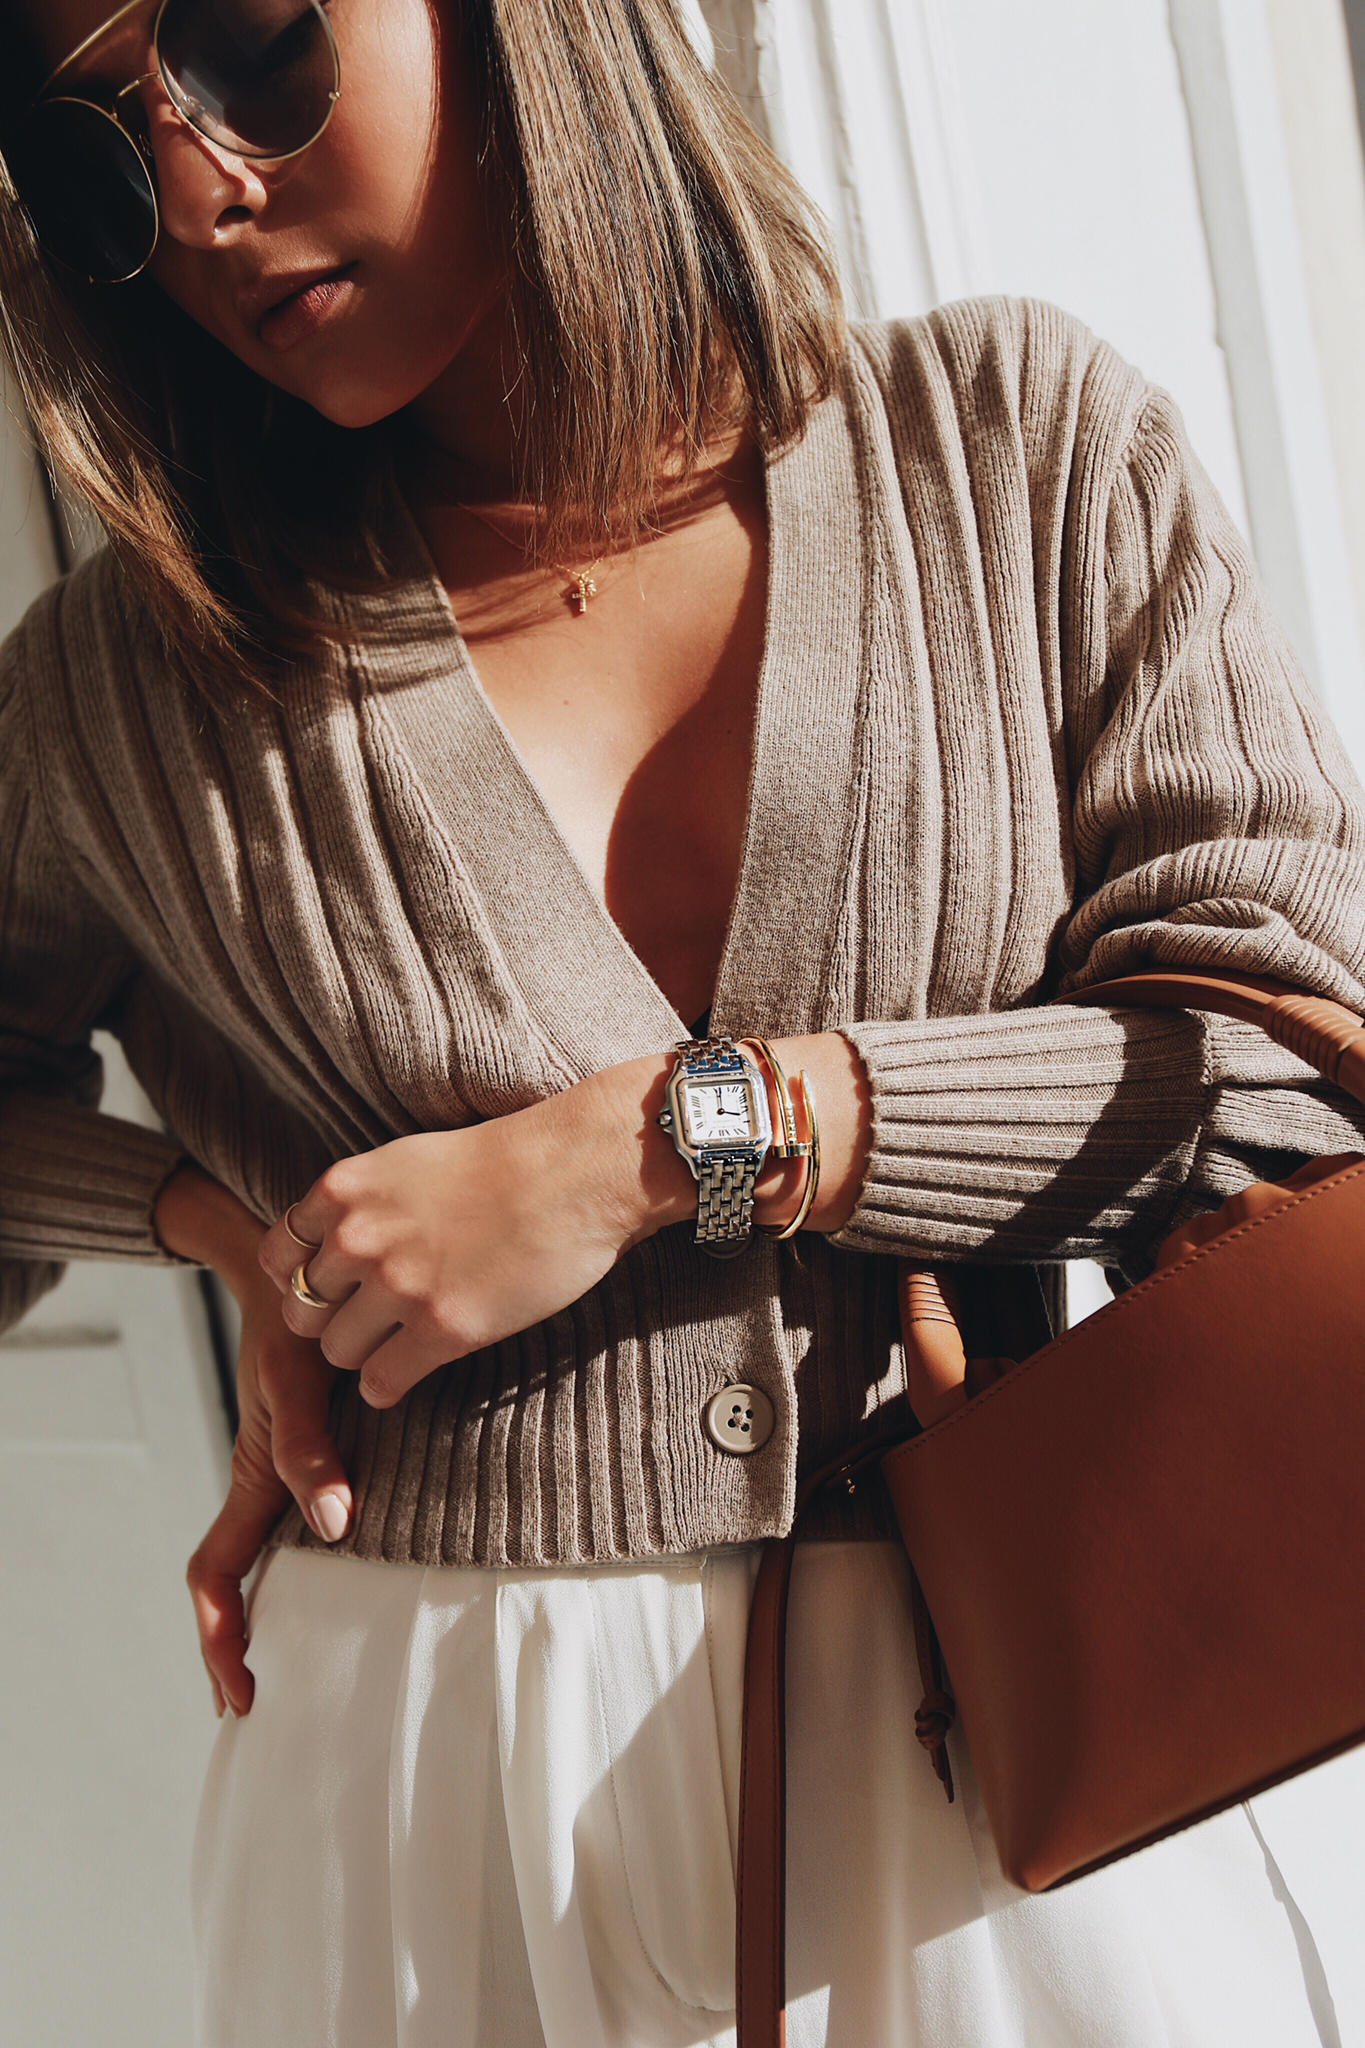 The Fall Outfit to Wear for Work and Play by Pam Hetlinger | TheGirlFromPanama.com | Chic fall look, fall outfit ideas for work, classy fall outfit, wide leg pants, ribbed cardigan, oversized cardigan, carolina santo domingo bag, cartier watch